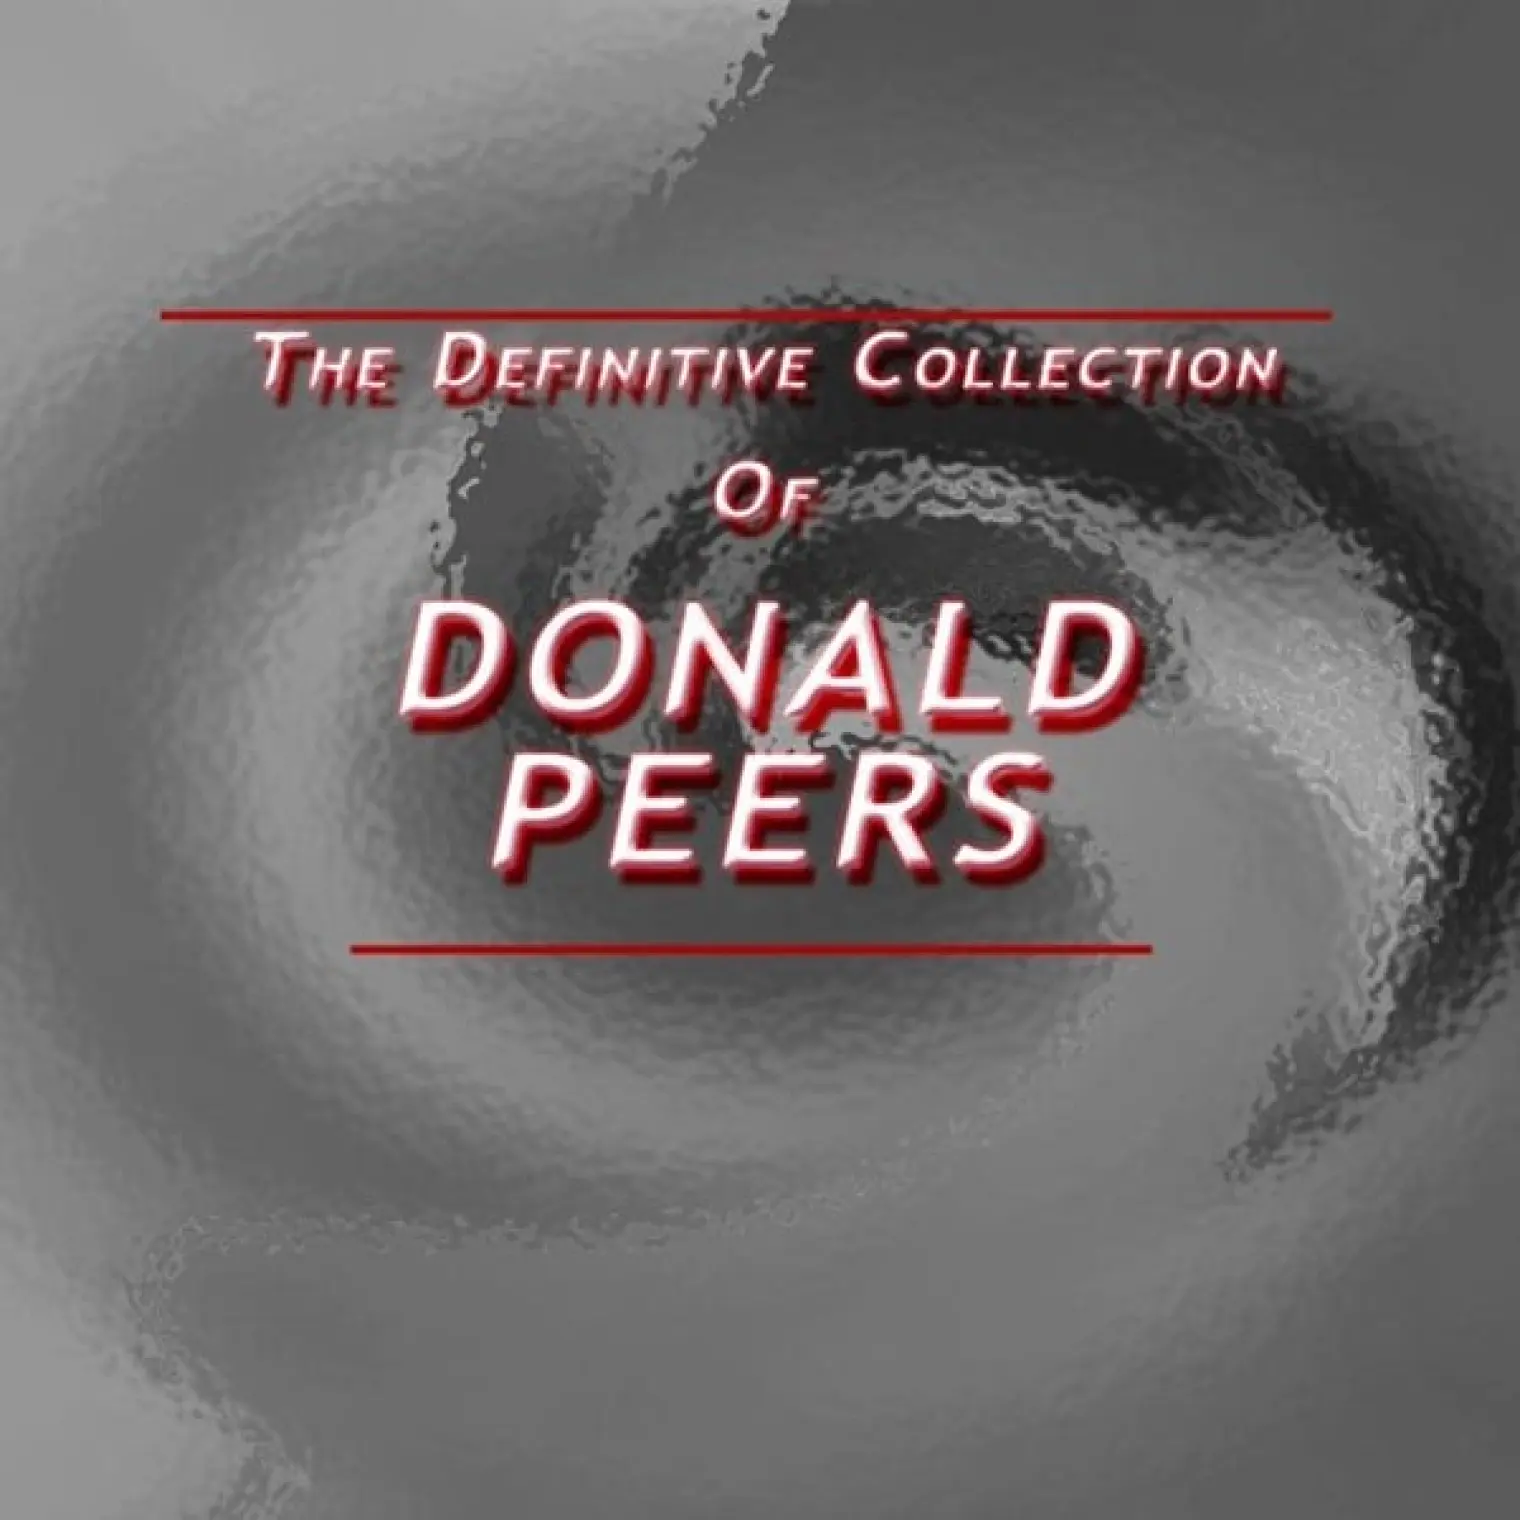 The Definitive Collection of Donald Peers -  Donald peers 